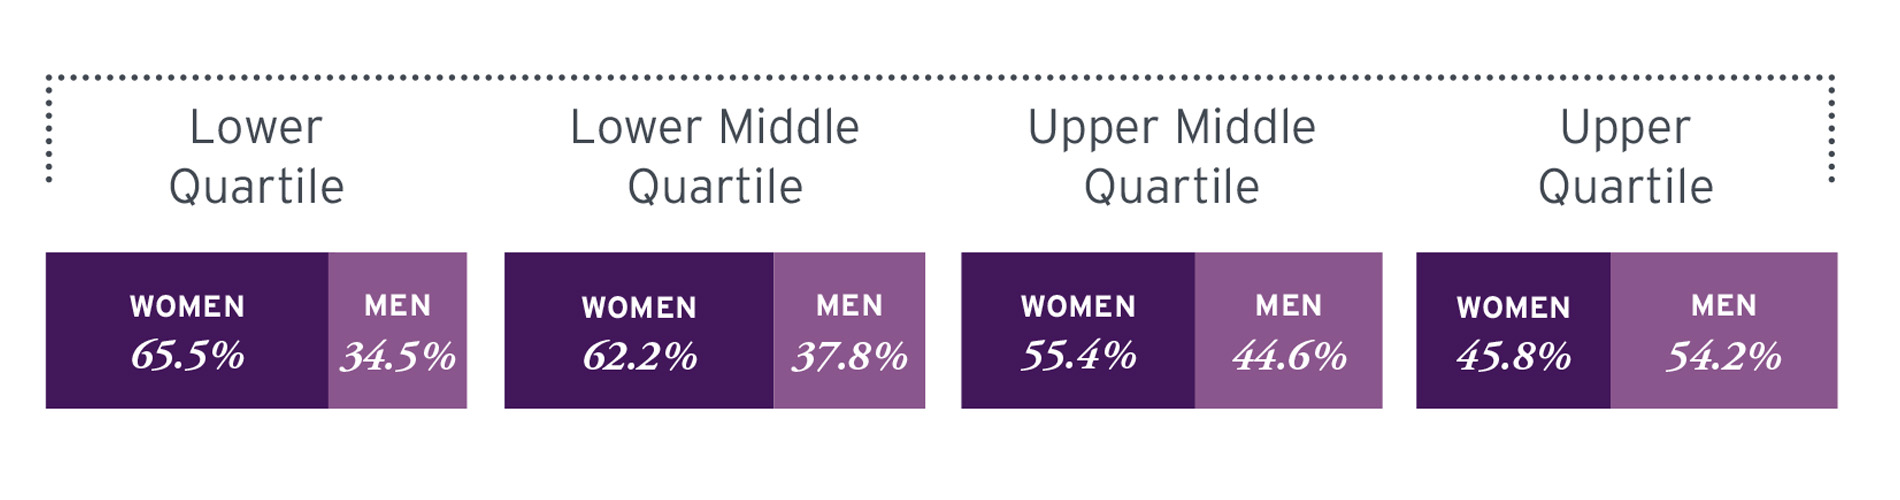 An infographic detailing Pay Quartiles. Lower Quartile, Women = 65.5% and Men = 34.5%. Lower Middle Quartile, Women = 62.2% and Men = 37.8%. Upper Middle Quartile, Women = 55.4% and Men = 44.6%. Upper Quartile, Women = 45.8% and Men = 54.2%.